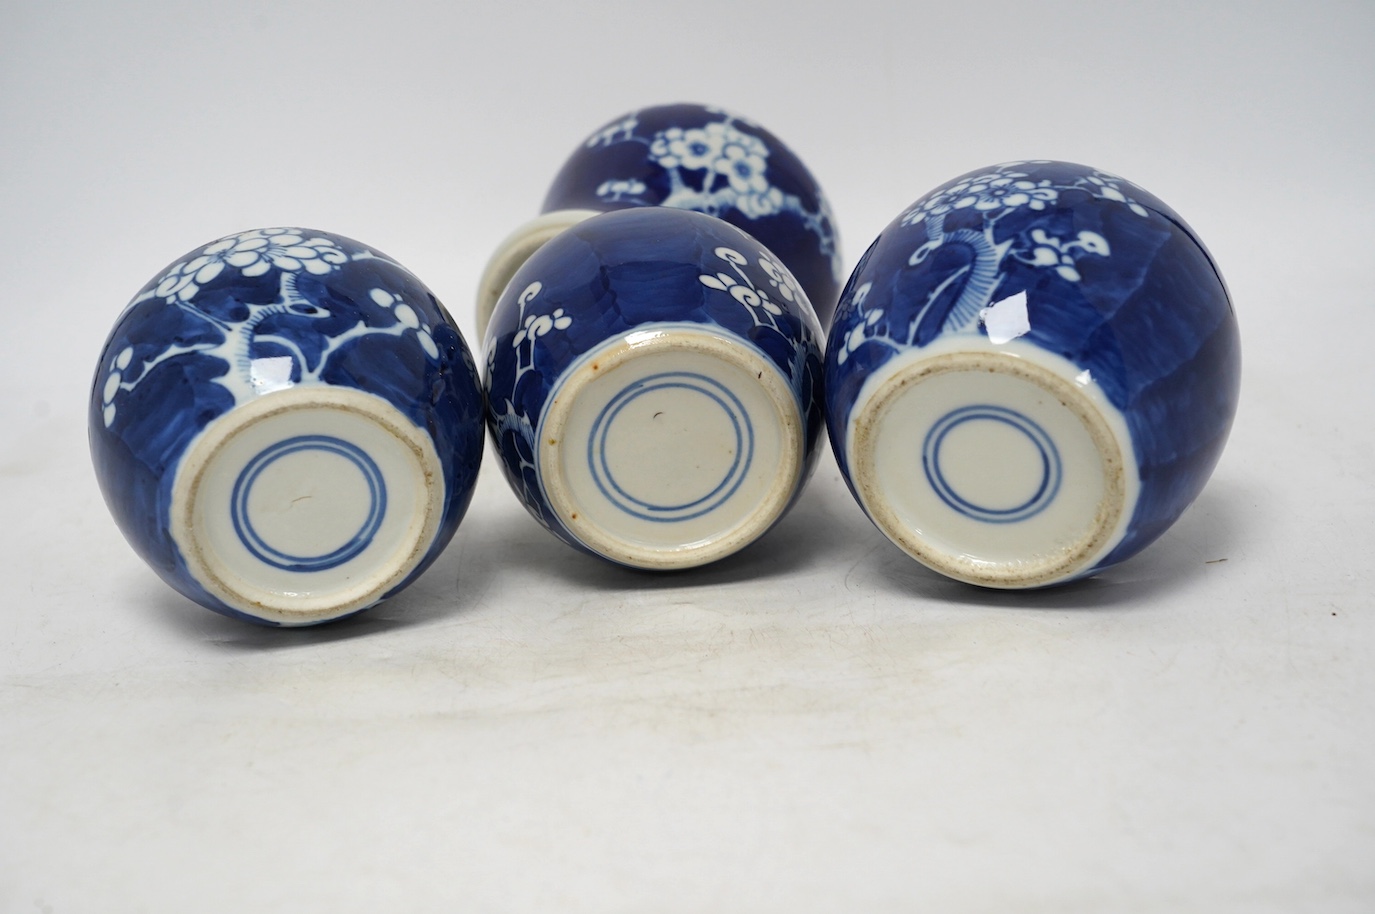 Three Chinese blue and white prunus jars and a similar vase and cover, early 20th century, vase 16.5cm high. Condition - poor as all three jars have the covers missing